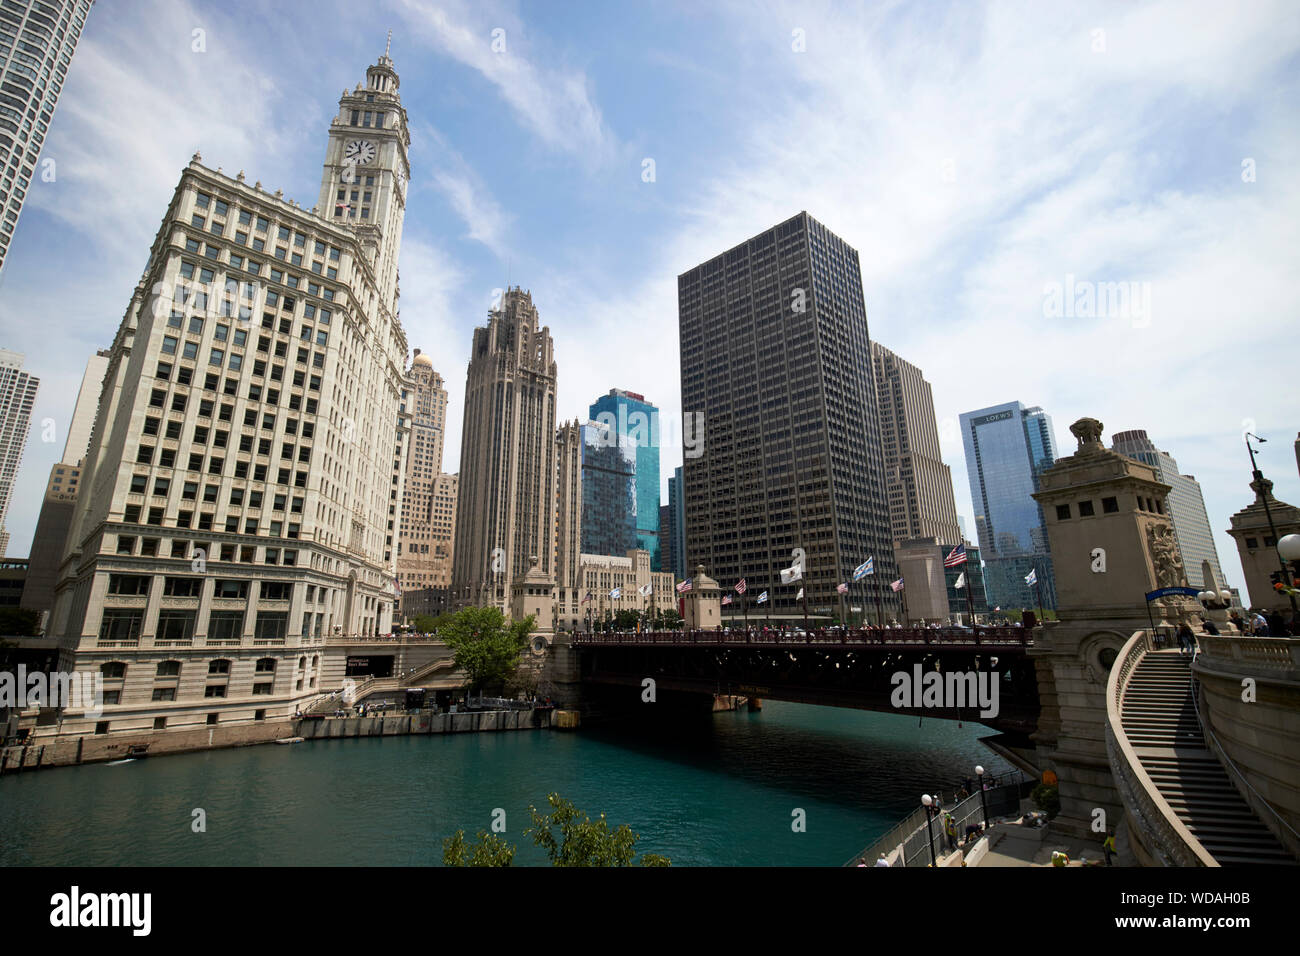 chicago river view of the wrigley building tribune tower dusable bridge and equitable building downtown chicago illinois united states of america Stock Photo